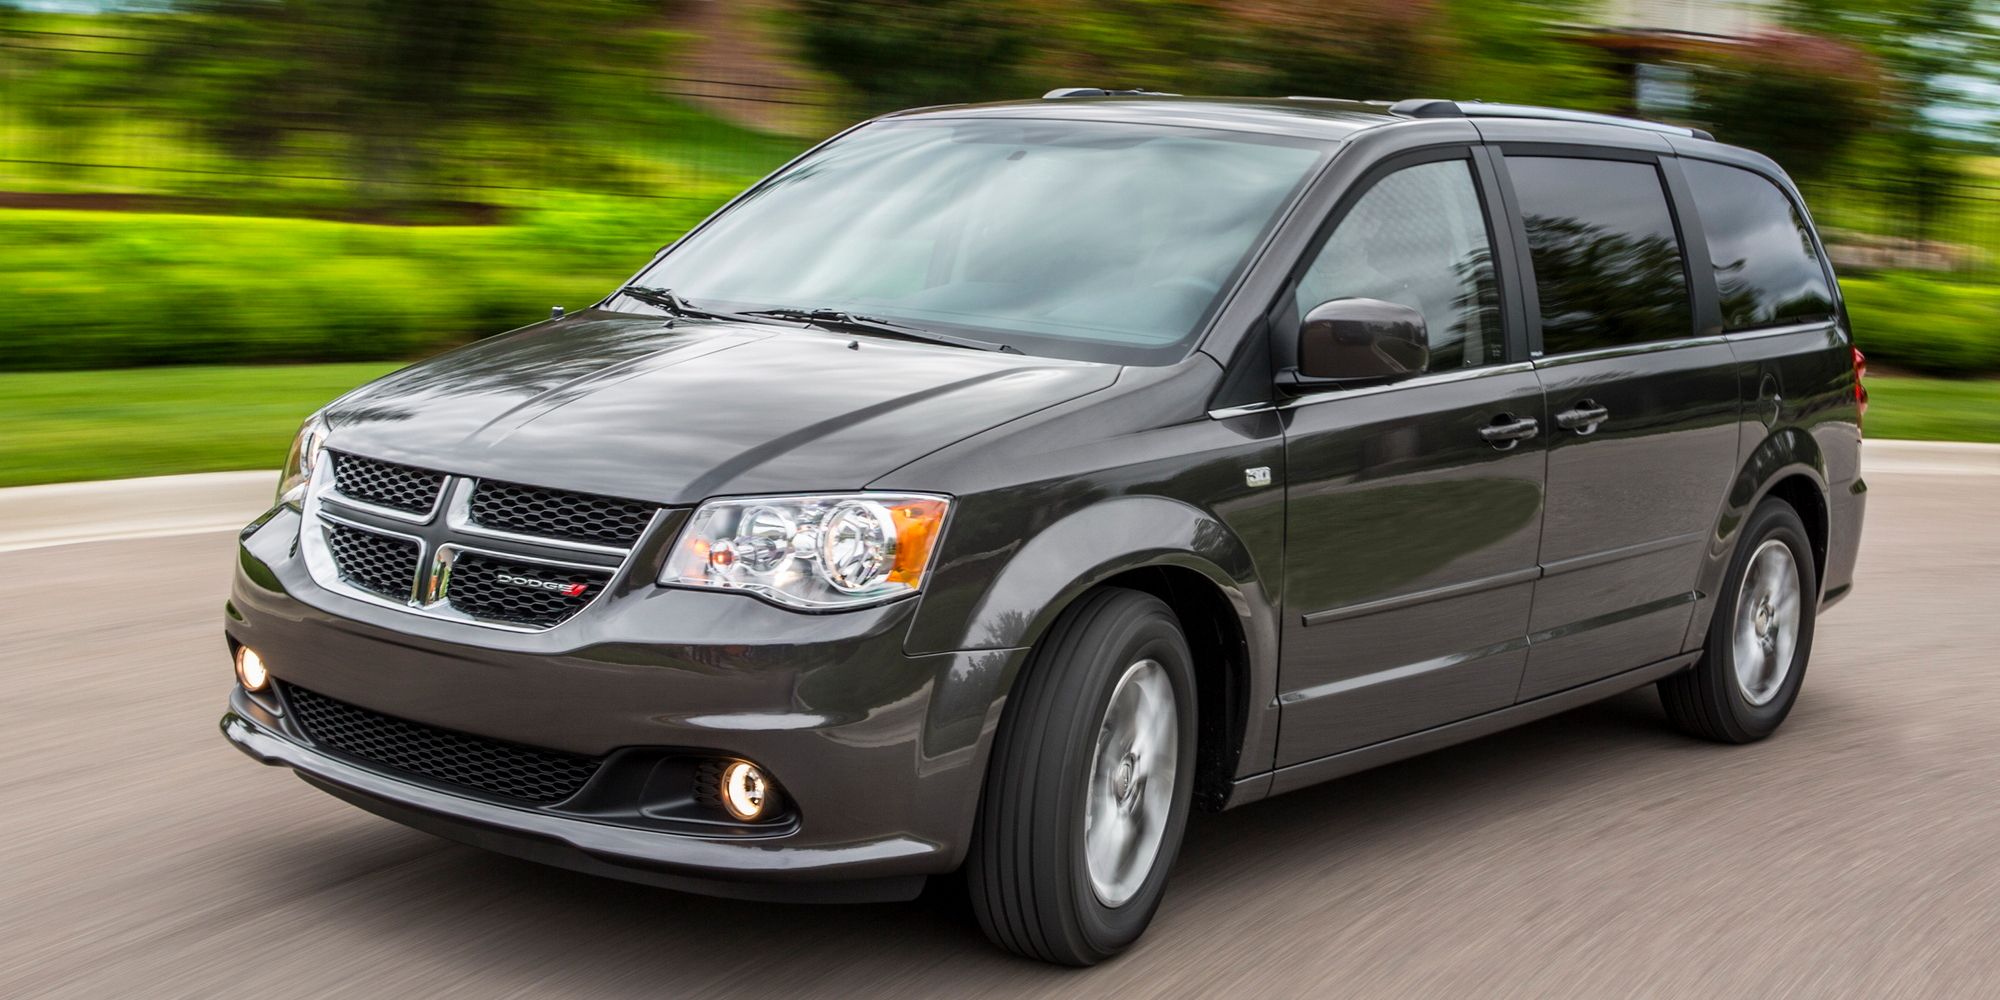 The front of the Dodge Grand Caravan